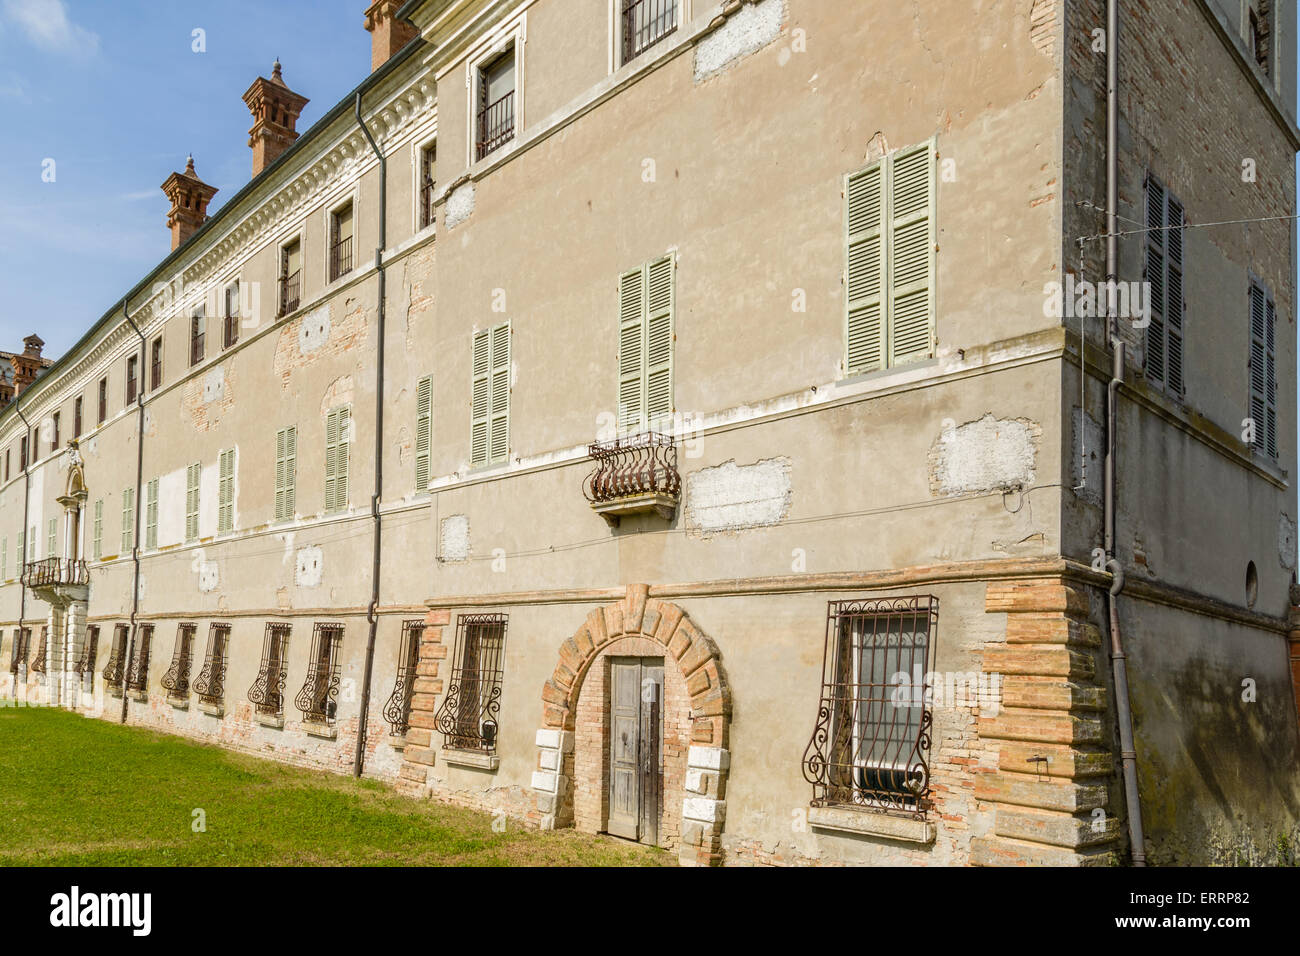 Historic feelings in the old architecture of an Italian XVI century ruined palace, Palazzo San Giacomo in Russi, village near Ravenna in Northern Italy: Stock Photo